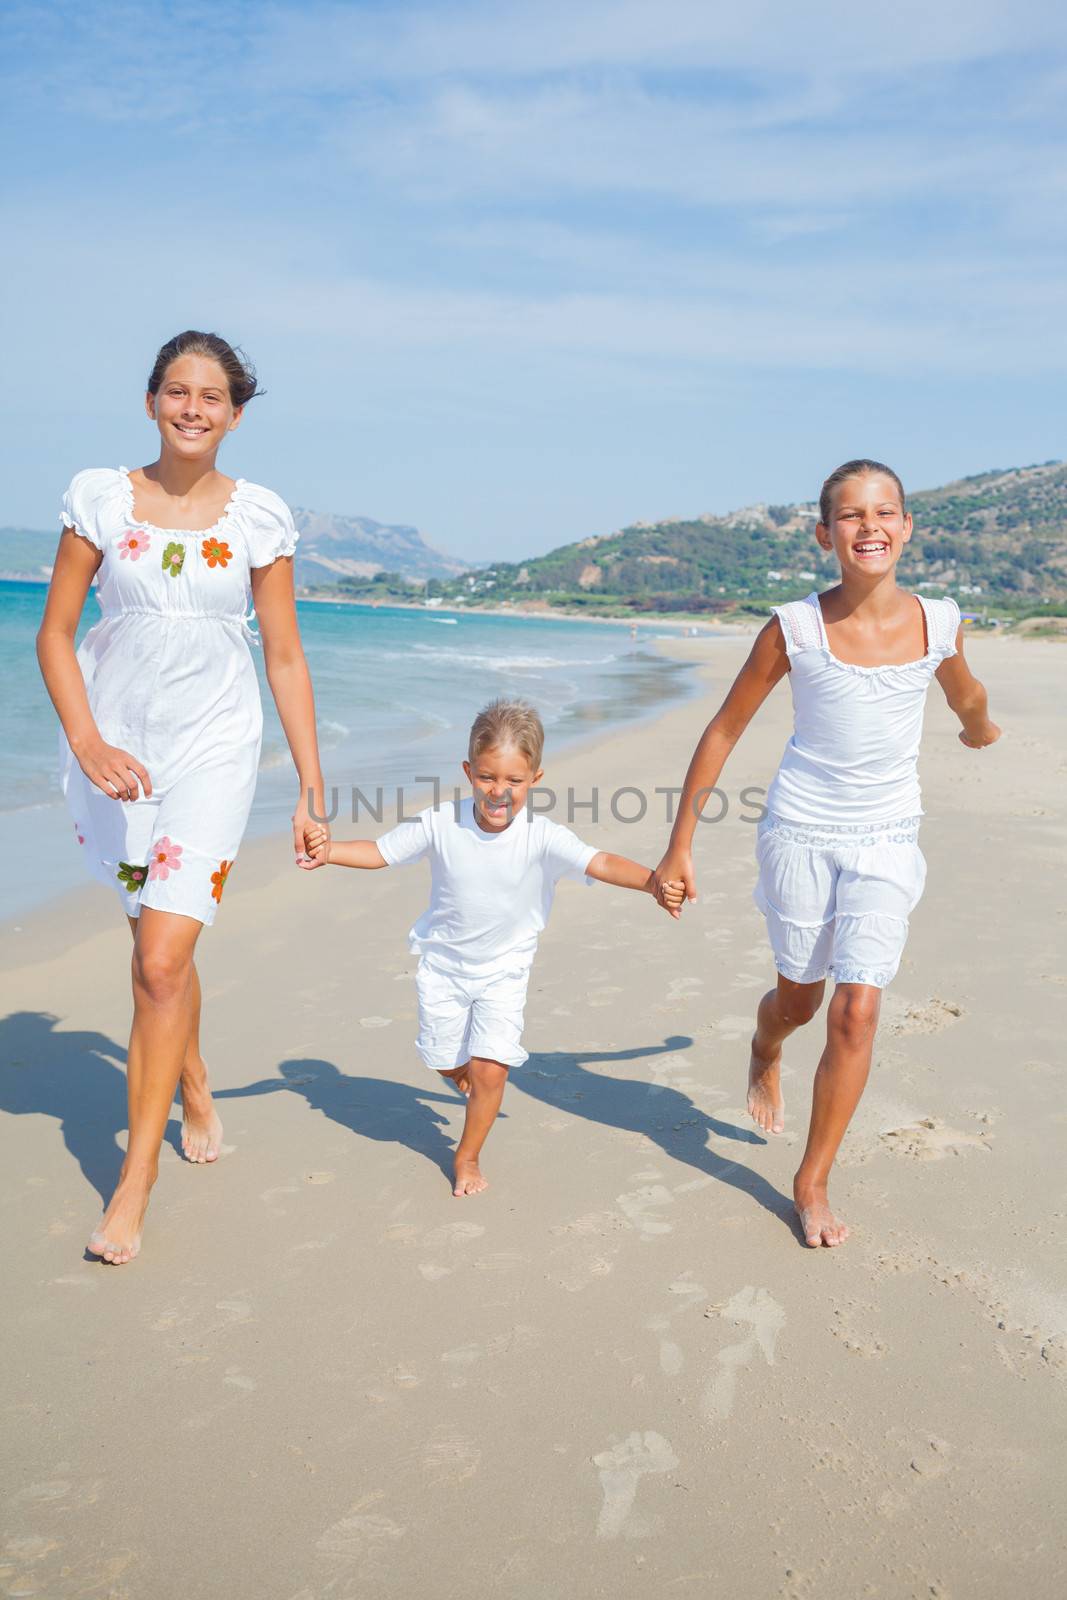 Adorable happy boy and girls running on beach vacation. Vertical view